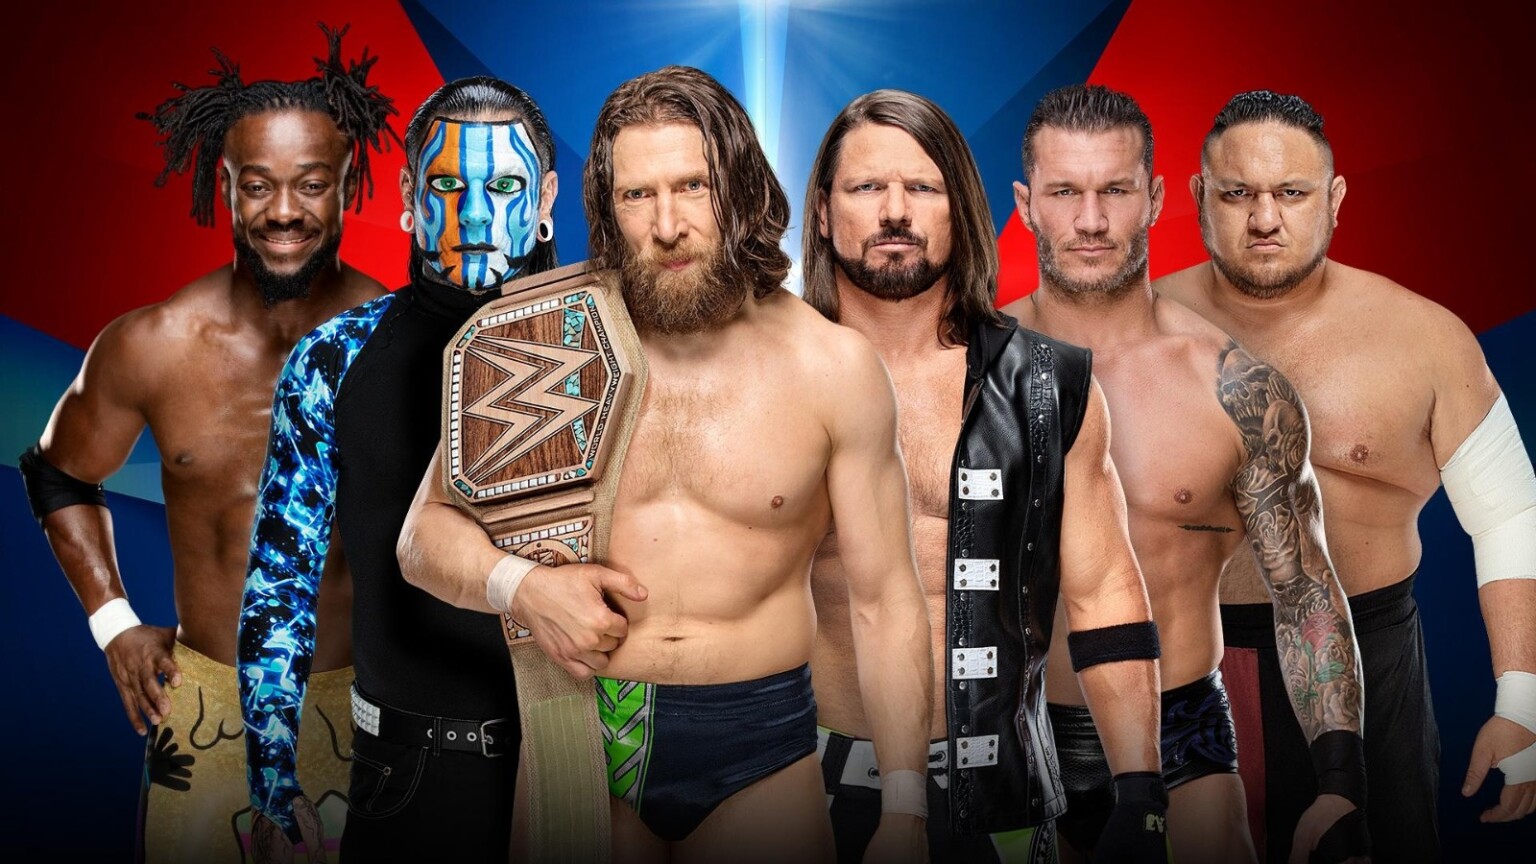 How to Watch the 2019 WWE Elimination Chamber Online - TechNadu